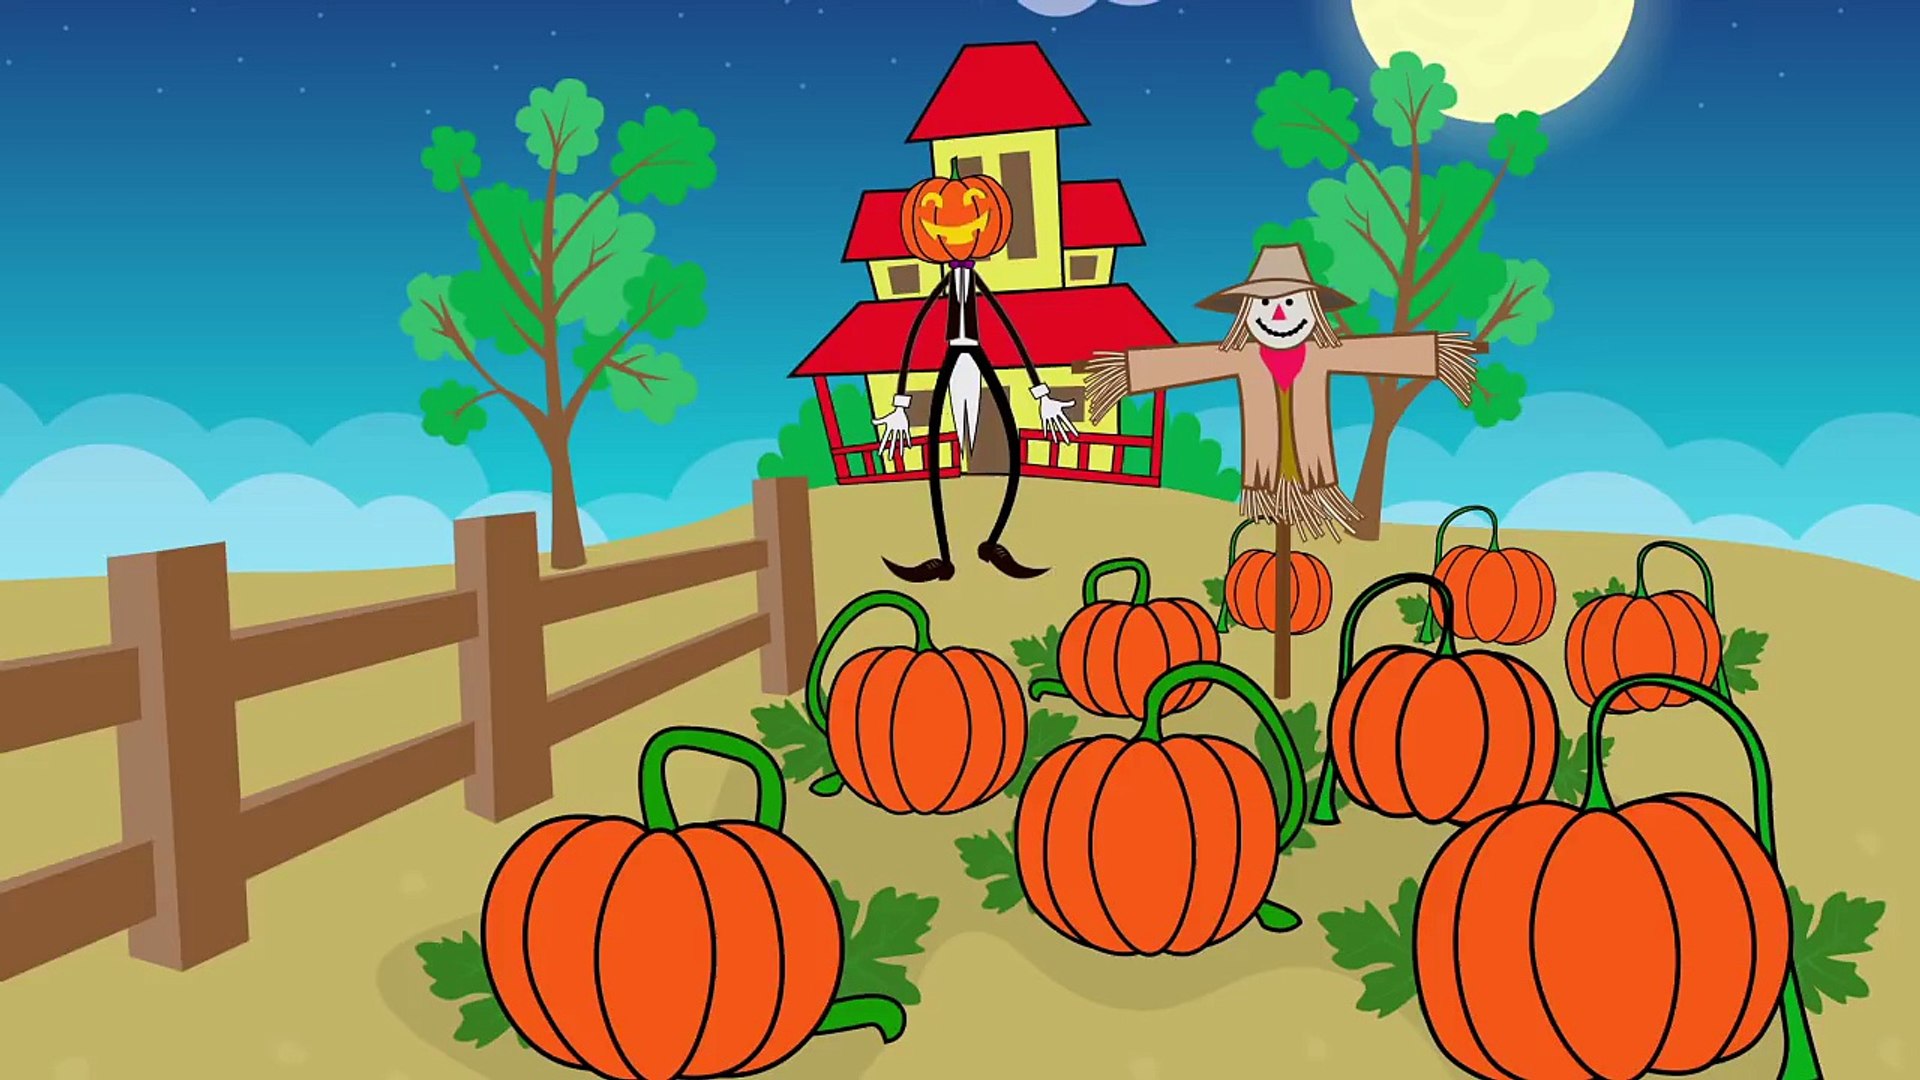 Jack o lantern Song | Halloween pumpkin animation and music for children -  Dailymotion Video